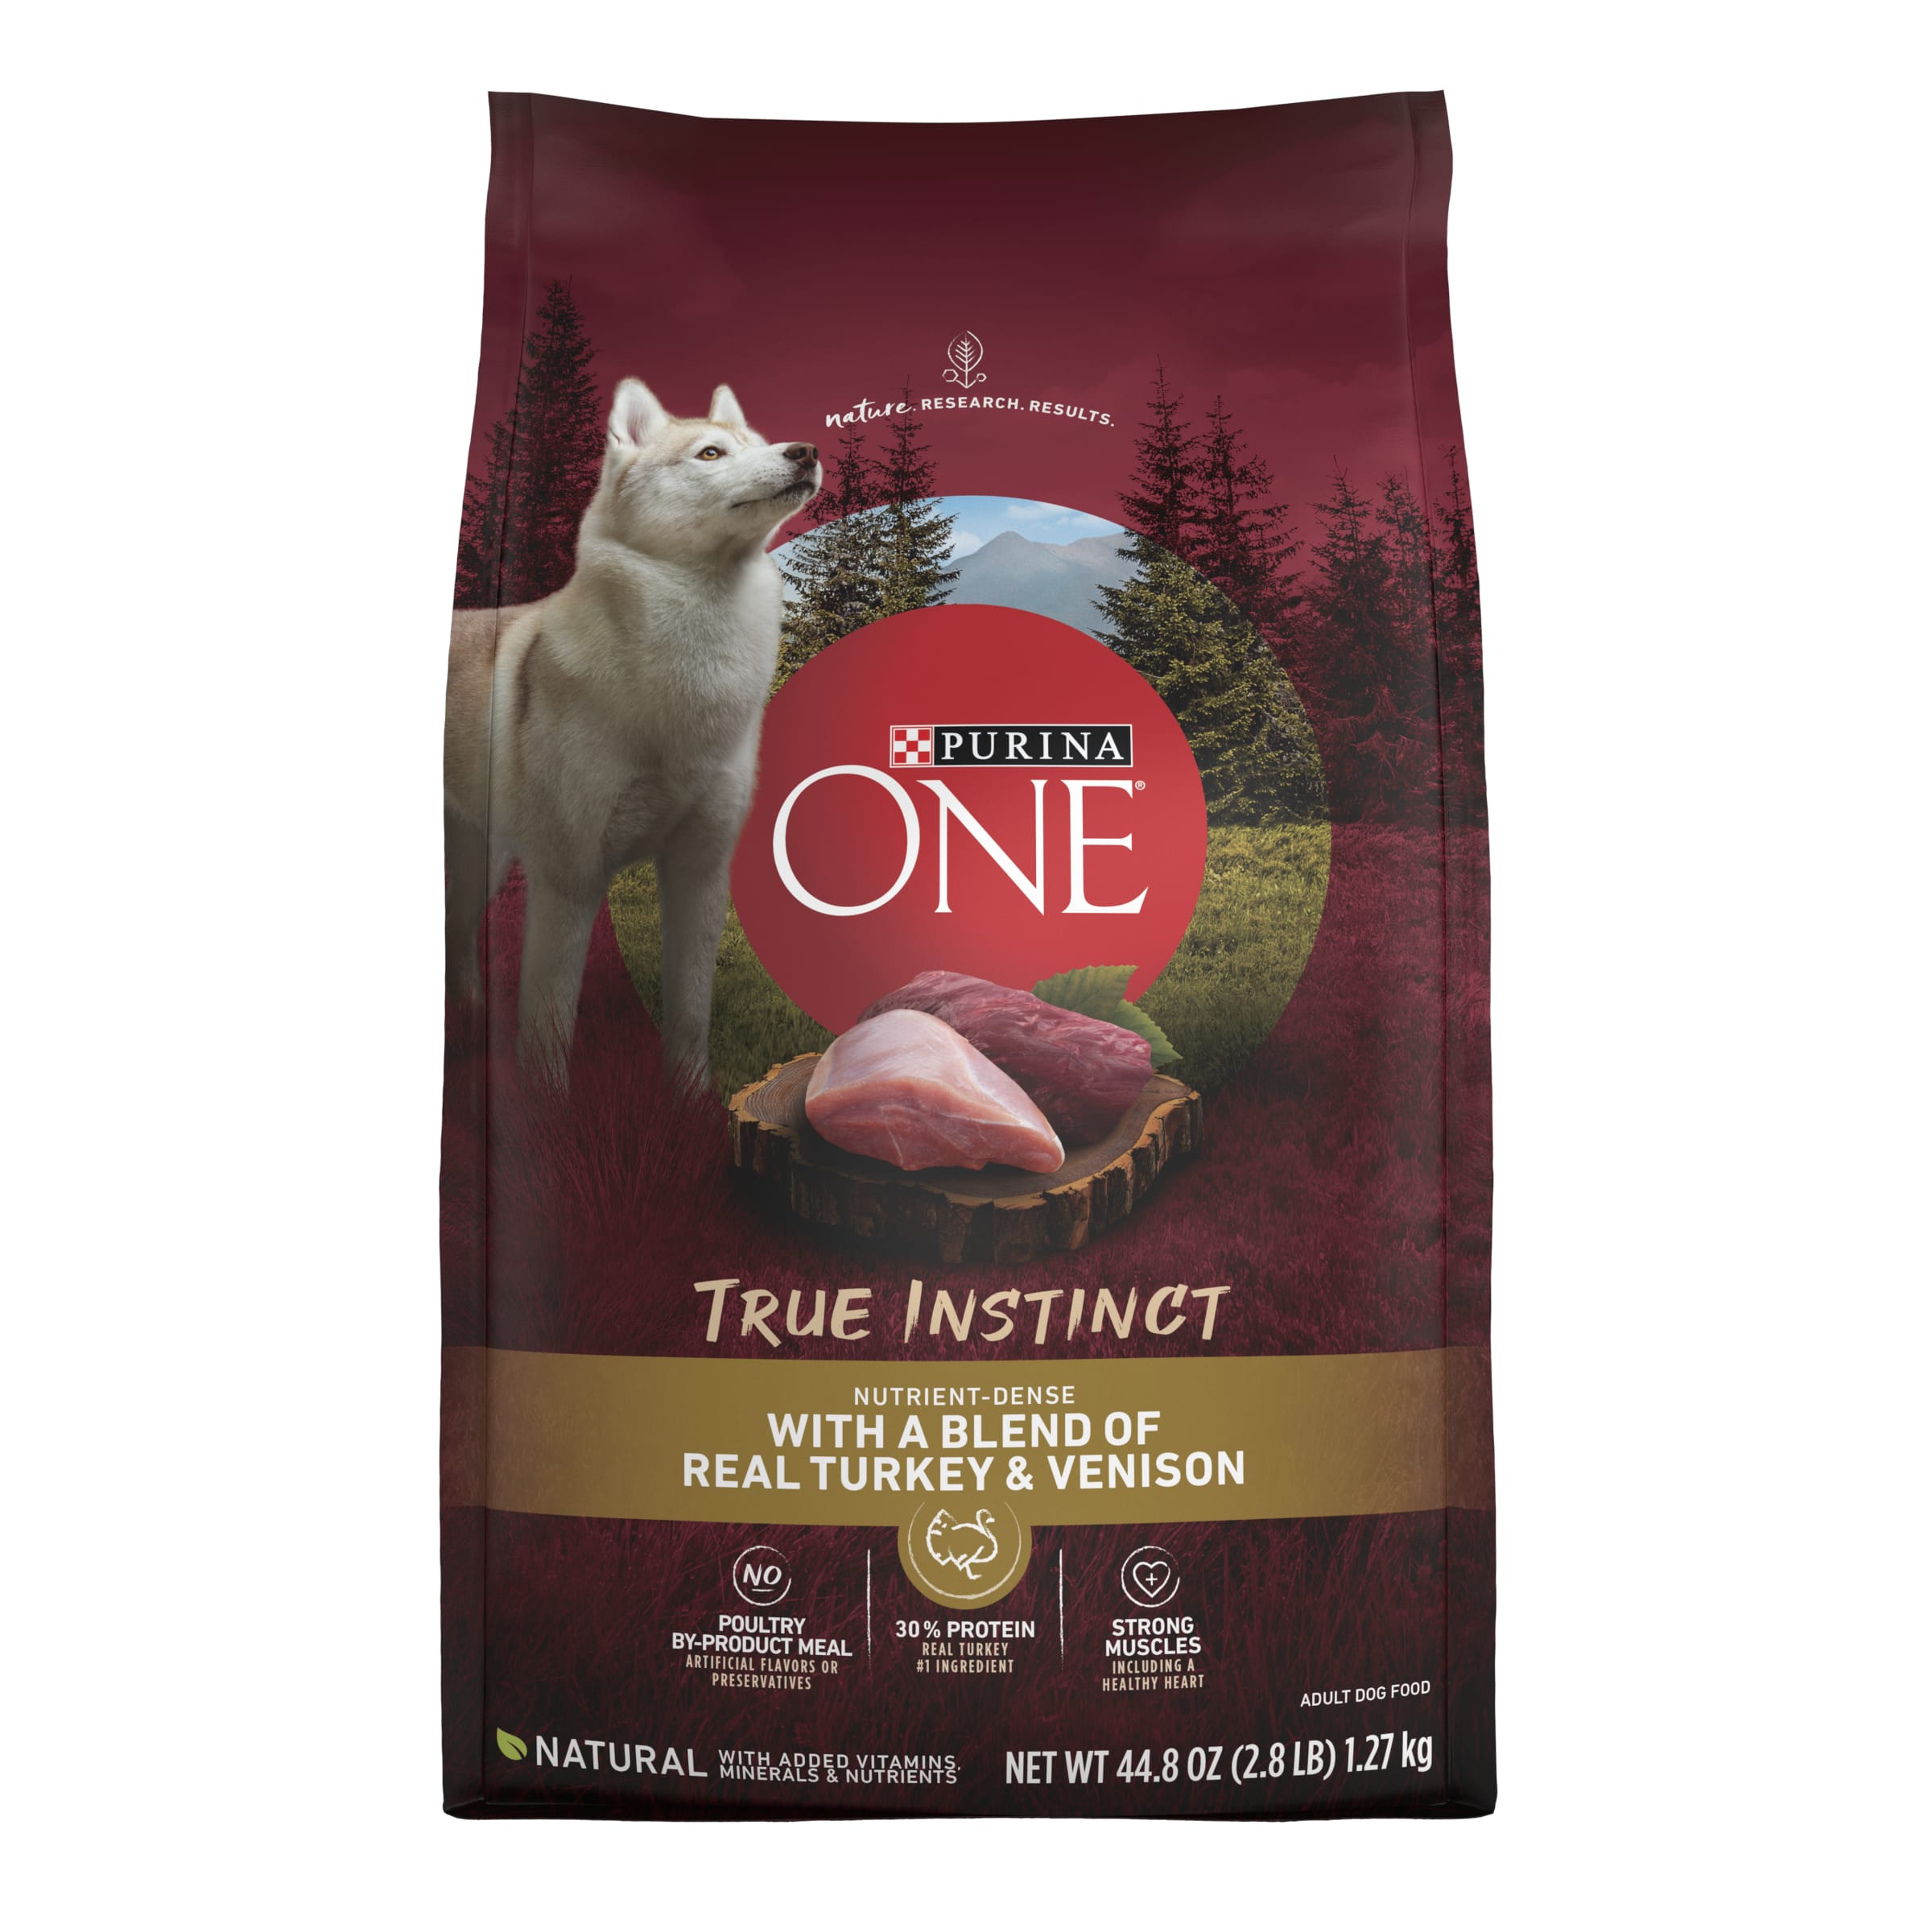 Purina ONE True Instinct High Protein Dry Dog Food, Real Turkey and Venison, 2.8 lb Bag - image 1 of 9